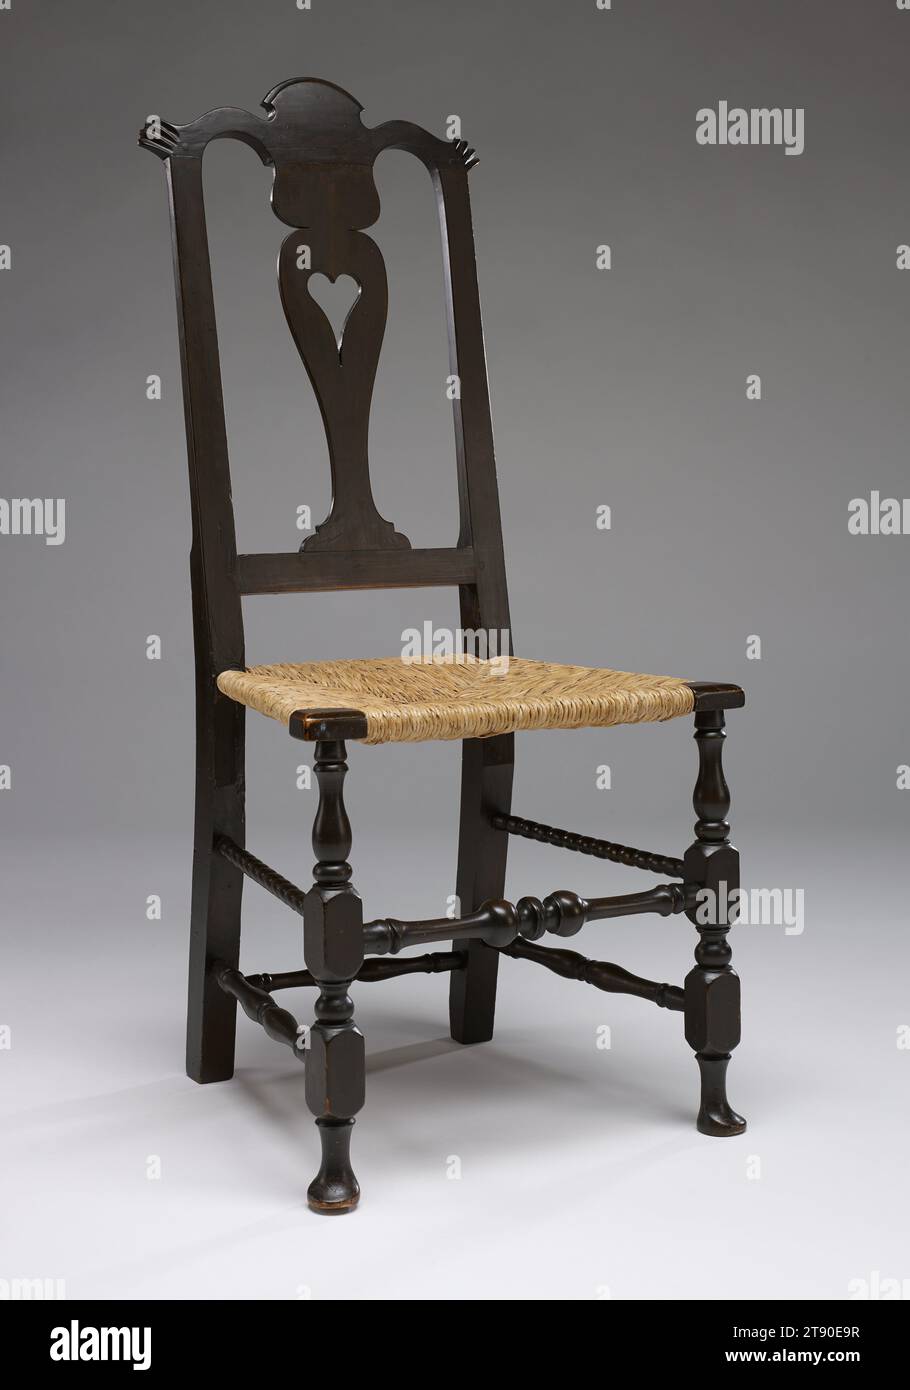 East Windsor side chair, 1770-90, Attributed to Timothy Loomis III, American, 1724 –1786, 41 5/8 × 19 1/4 × 15 1/2 in. (105.73 × 48.9 × 39.37 cm) (approx.), Cherry, ash, pigment, plant fibers, United States, 18th century, This chair boasts some distinctive decoration. The vase-shaped splat, or center back section, has a cutout heart. The undulating top rail features a 'pagoda' design at the center and carved 'ears' on each side. The flat-bottomed, carved pad feet and curving back rail are the details of an ambitious craftsman, a third-generation joiner from the Connecticut River valley Stock Photo